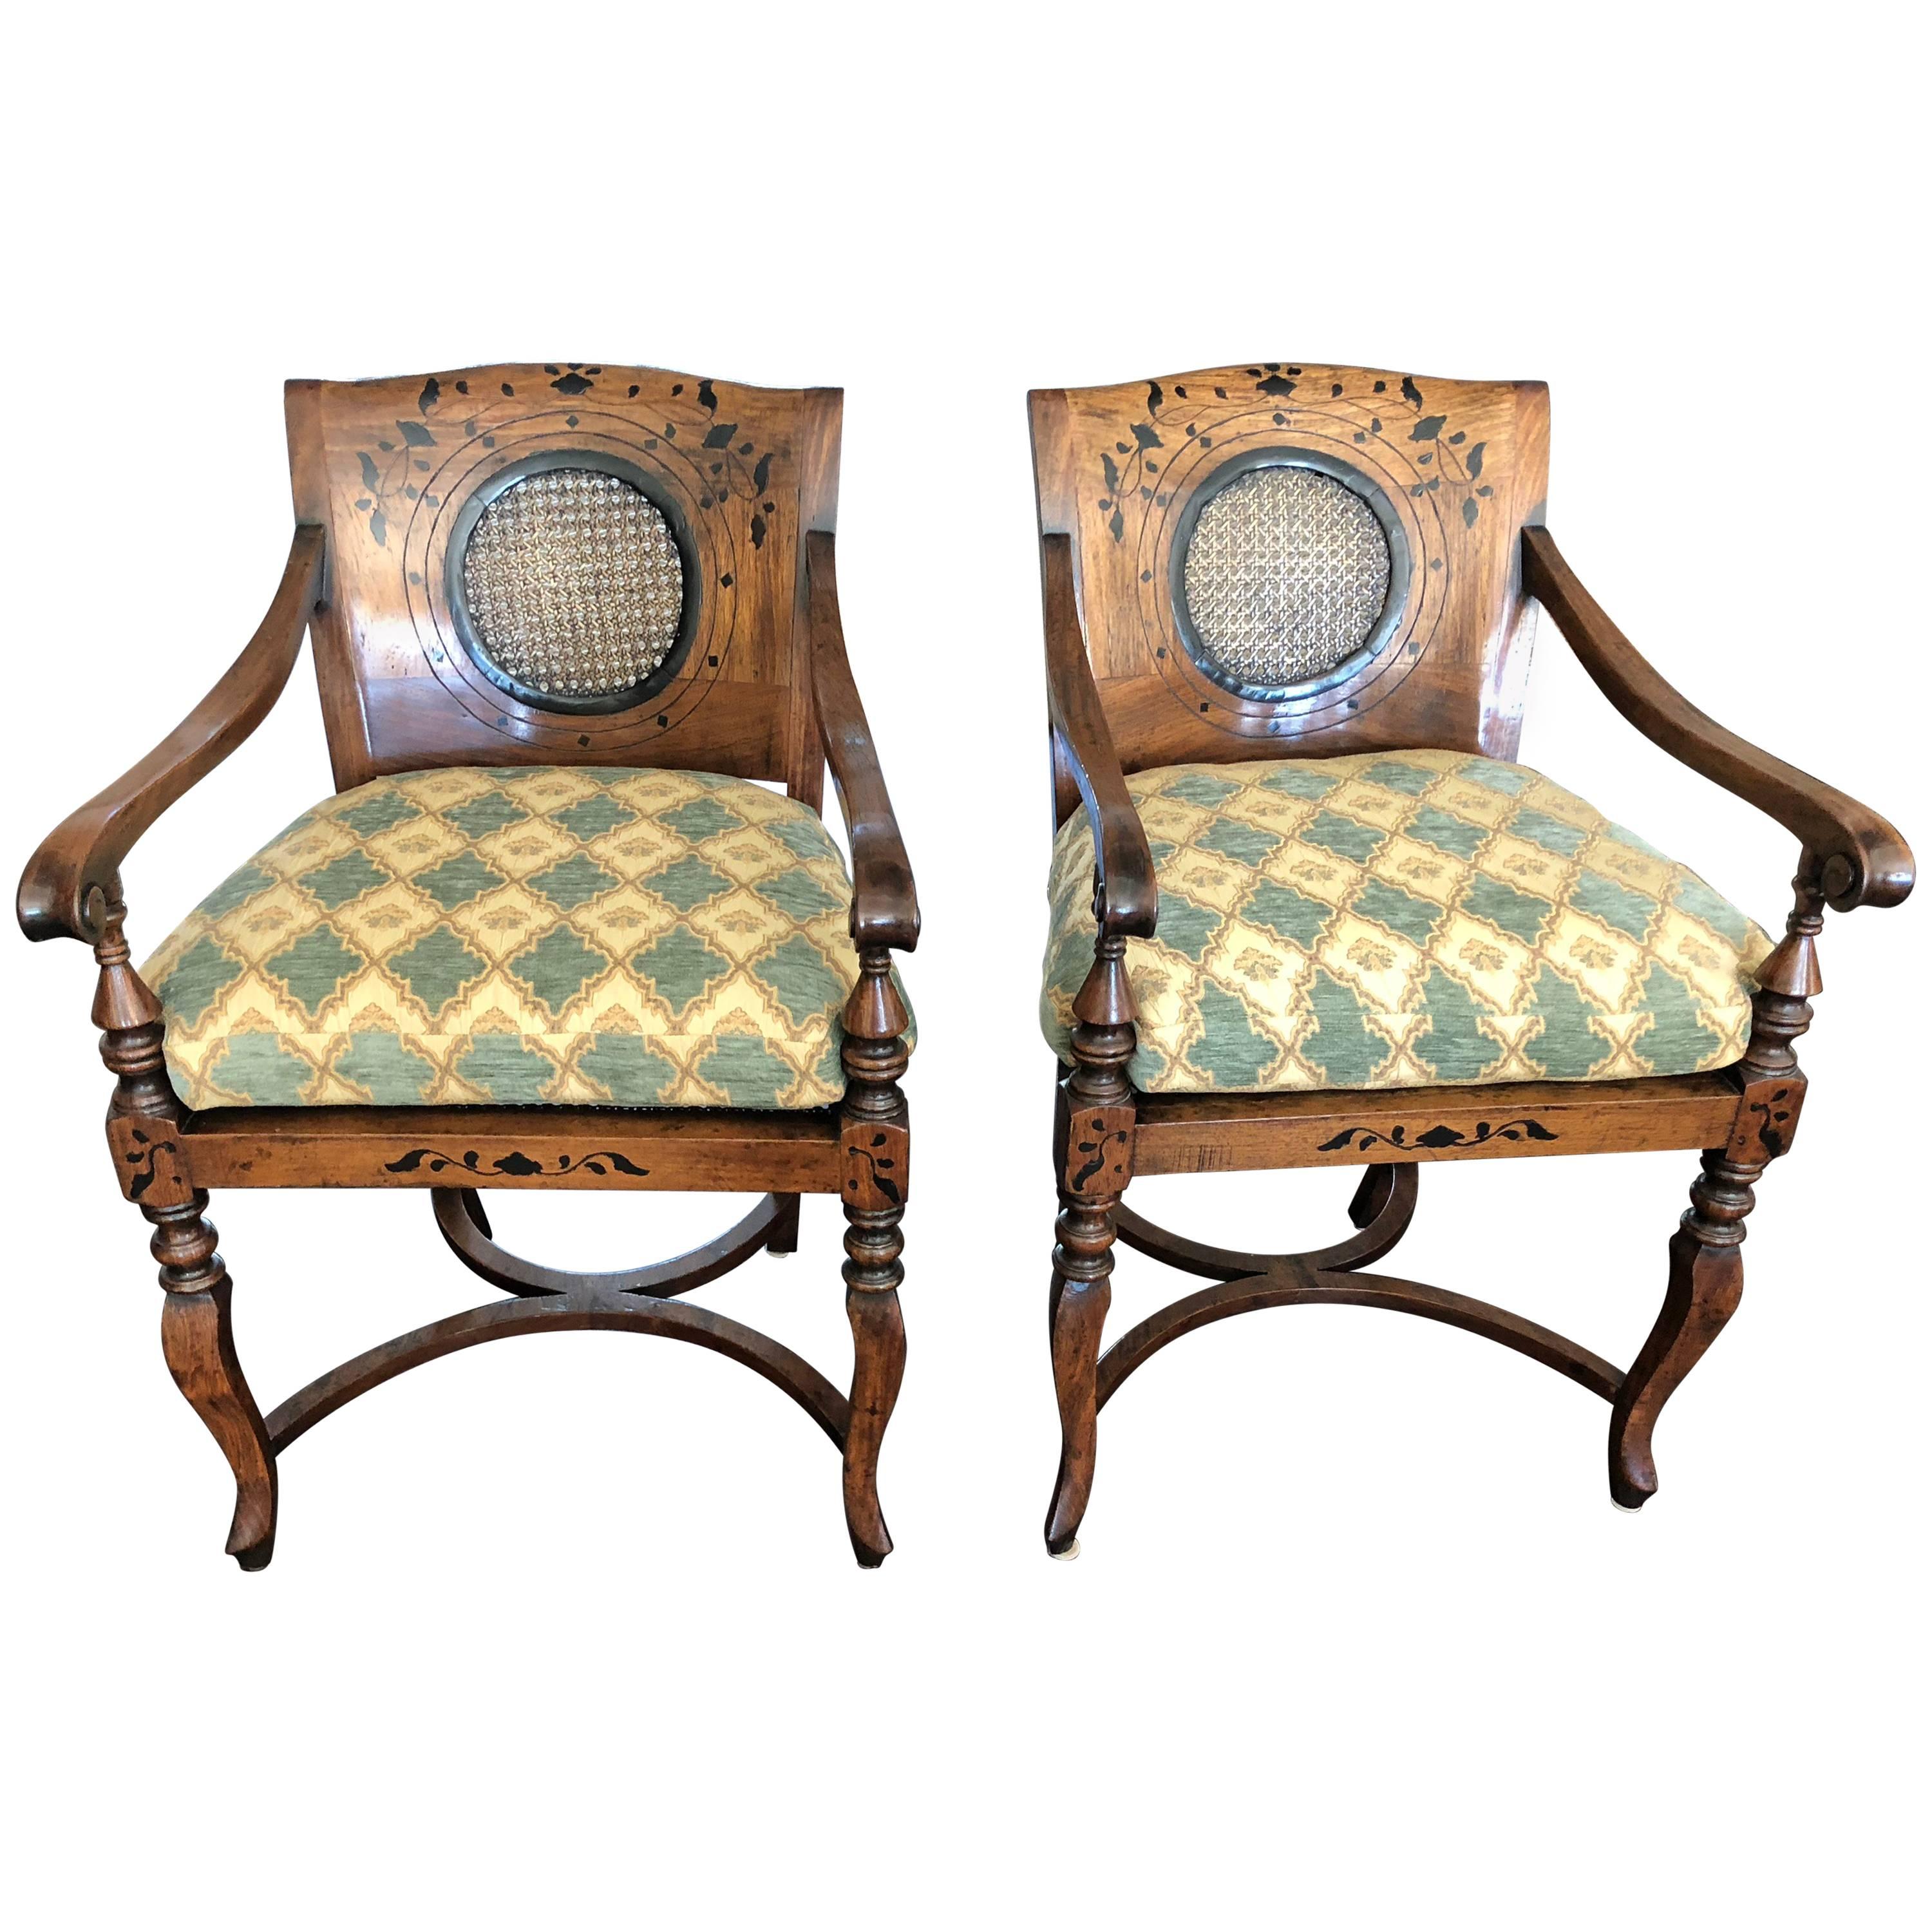 Pair of Anglo-Portuguese Armchairs